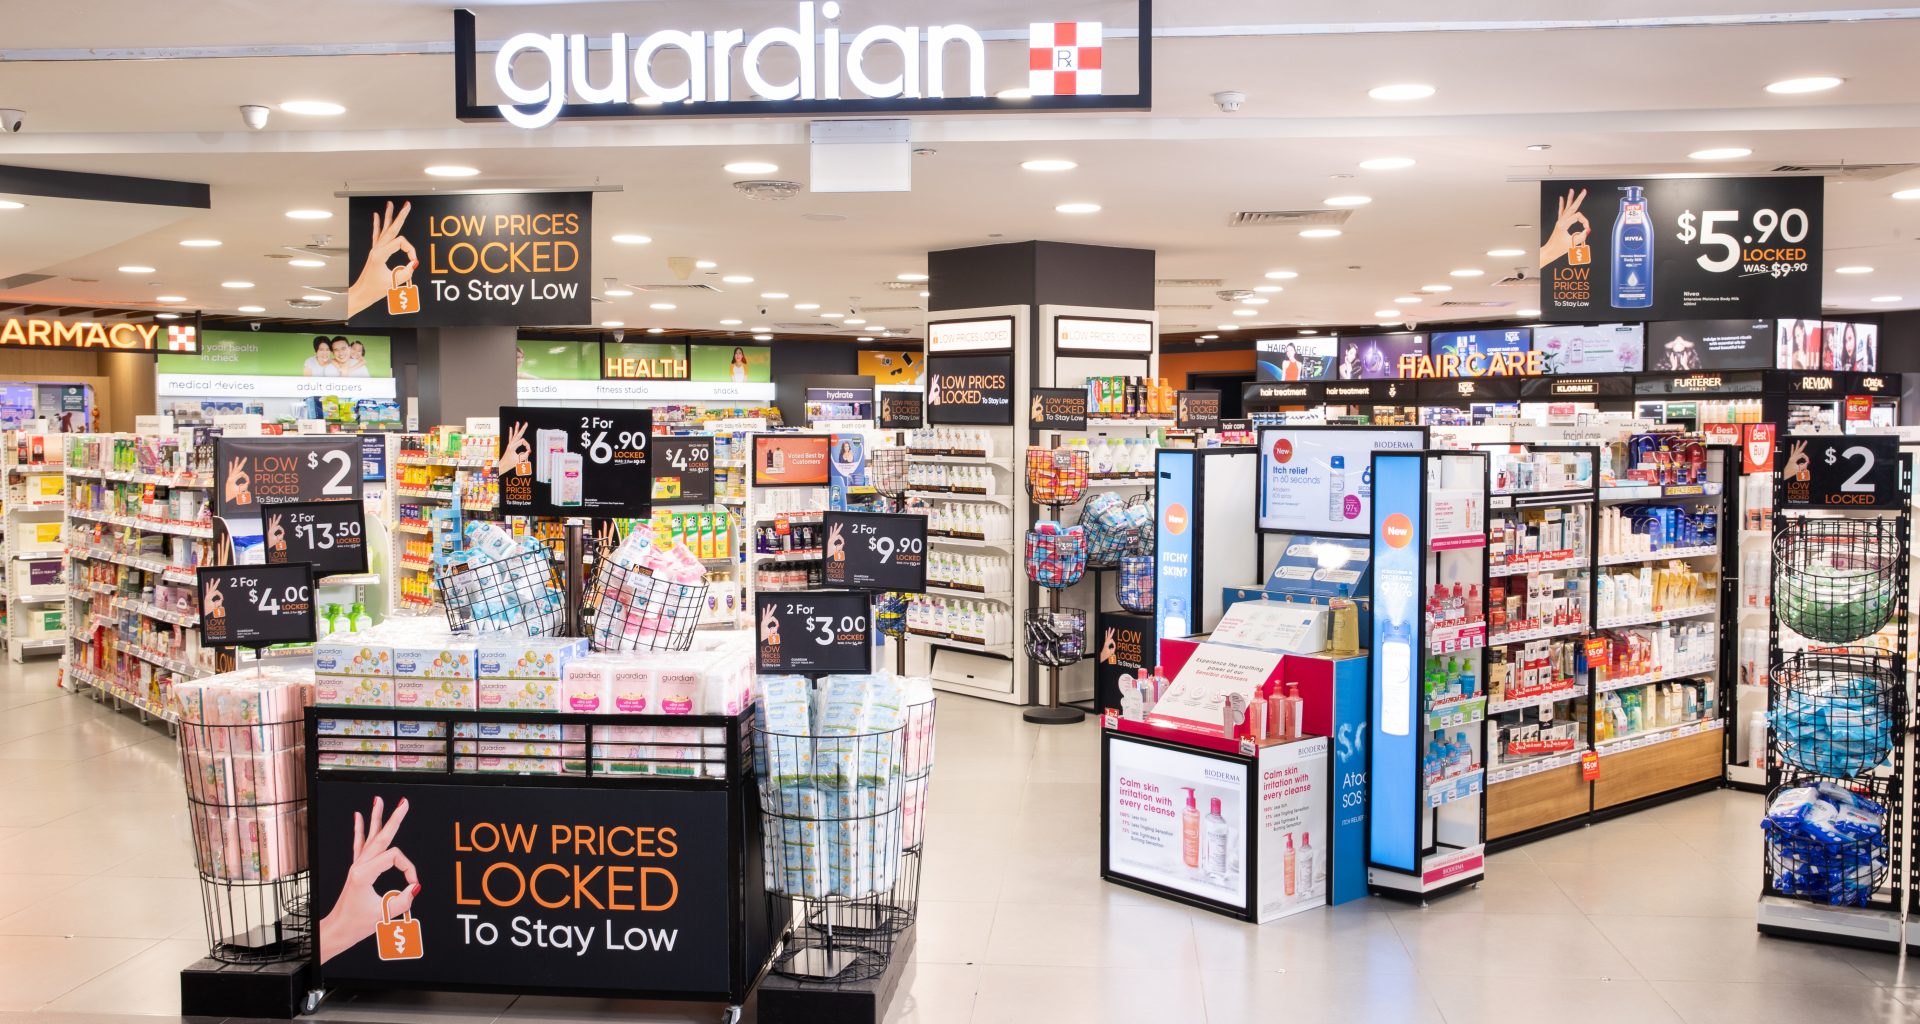 Guardian Brand lowers and locks prices of over 500 health and personal care essentials until the end of the year; save up to 25%! - Alvinology